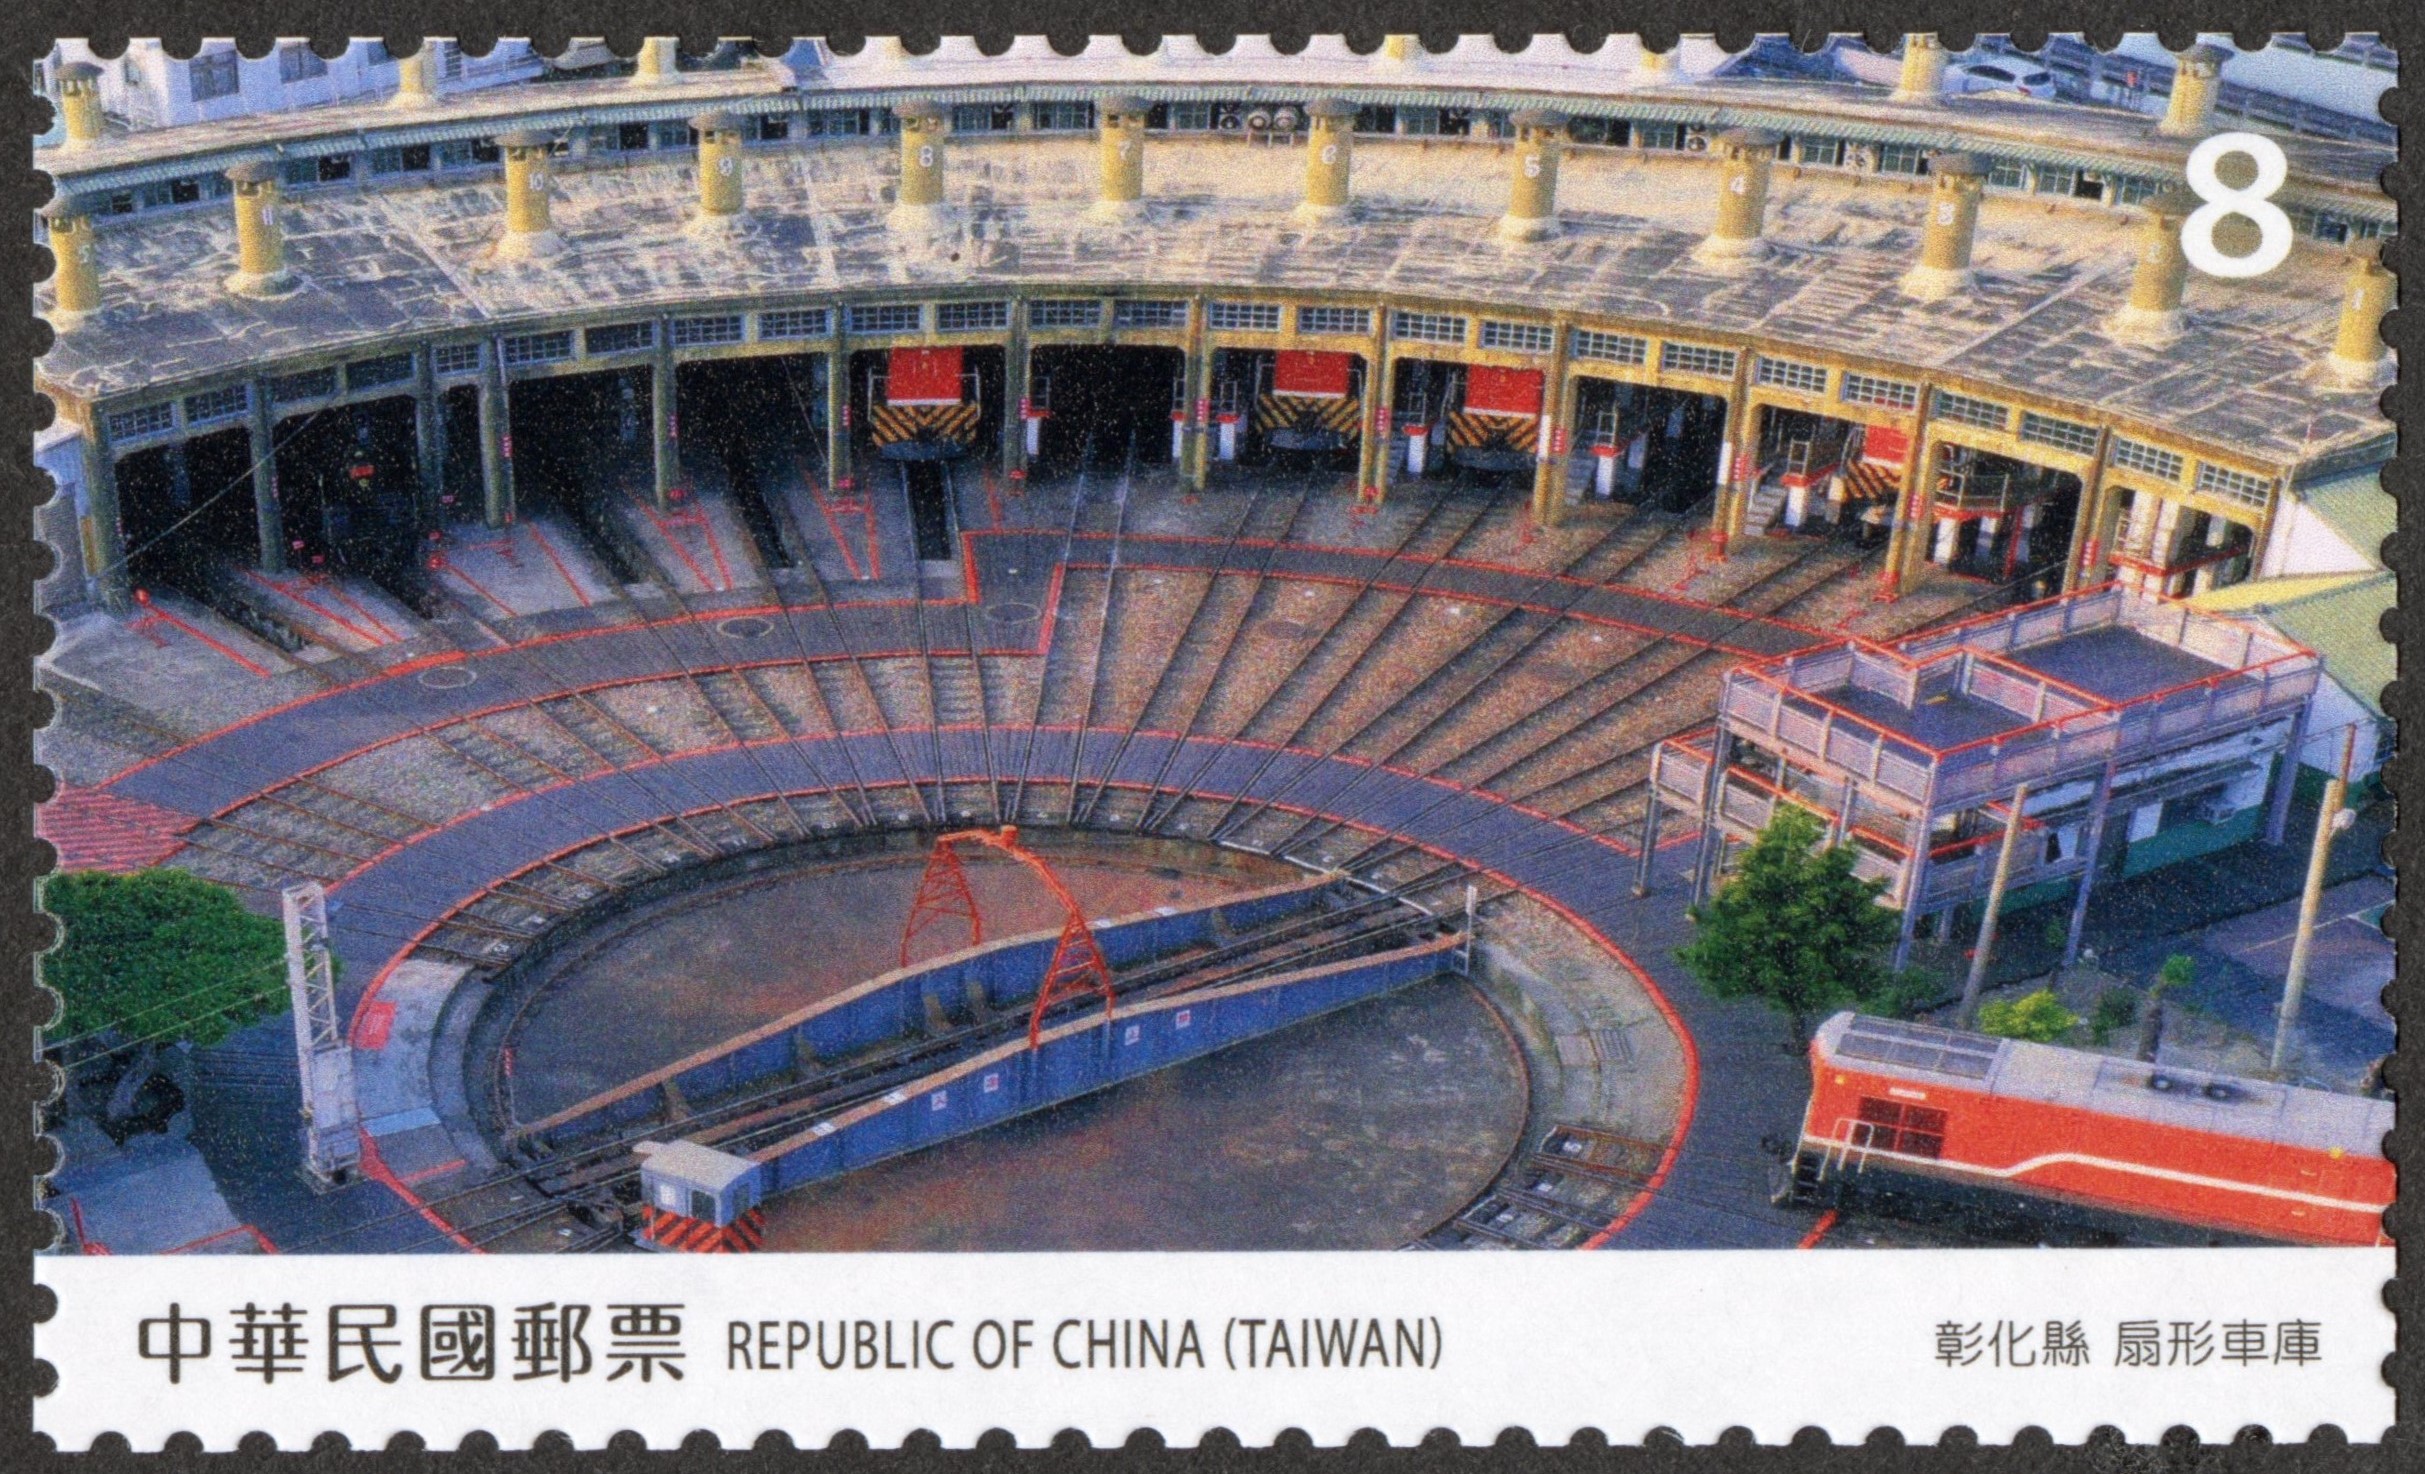 Sp.730 Taiwan Scenery Postage Stamps — Changhua County